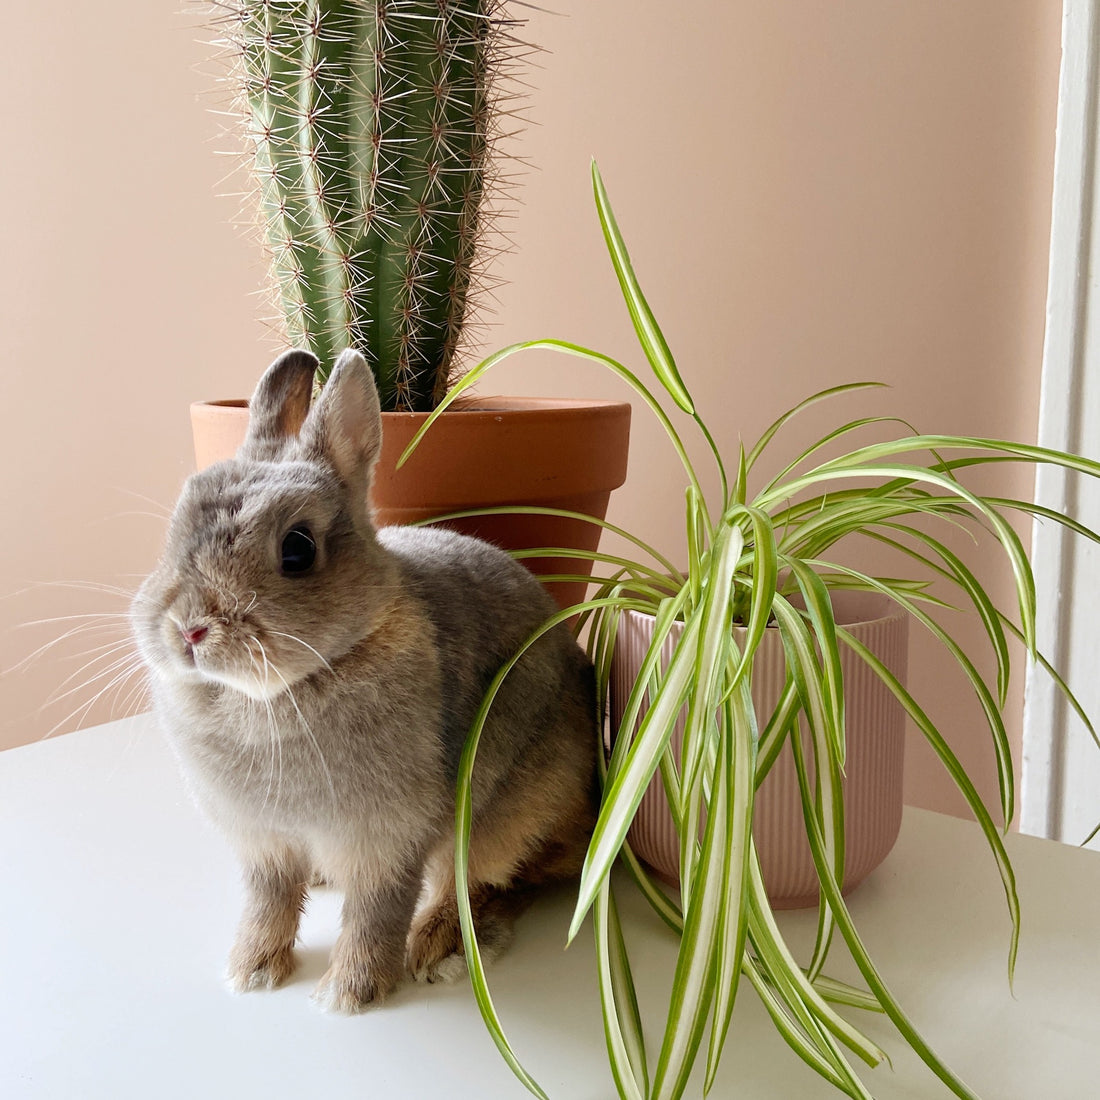 “Are your plants safe for my pet?”